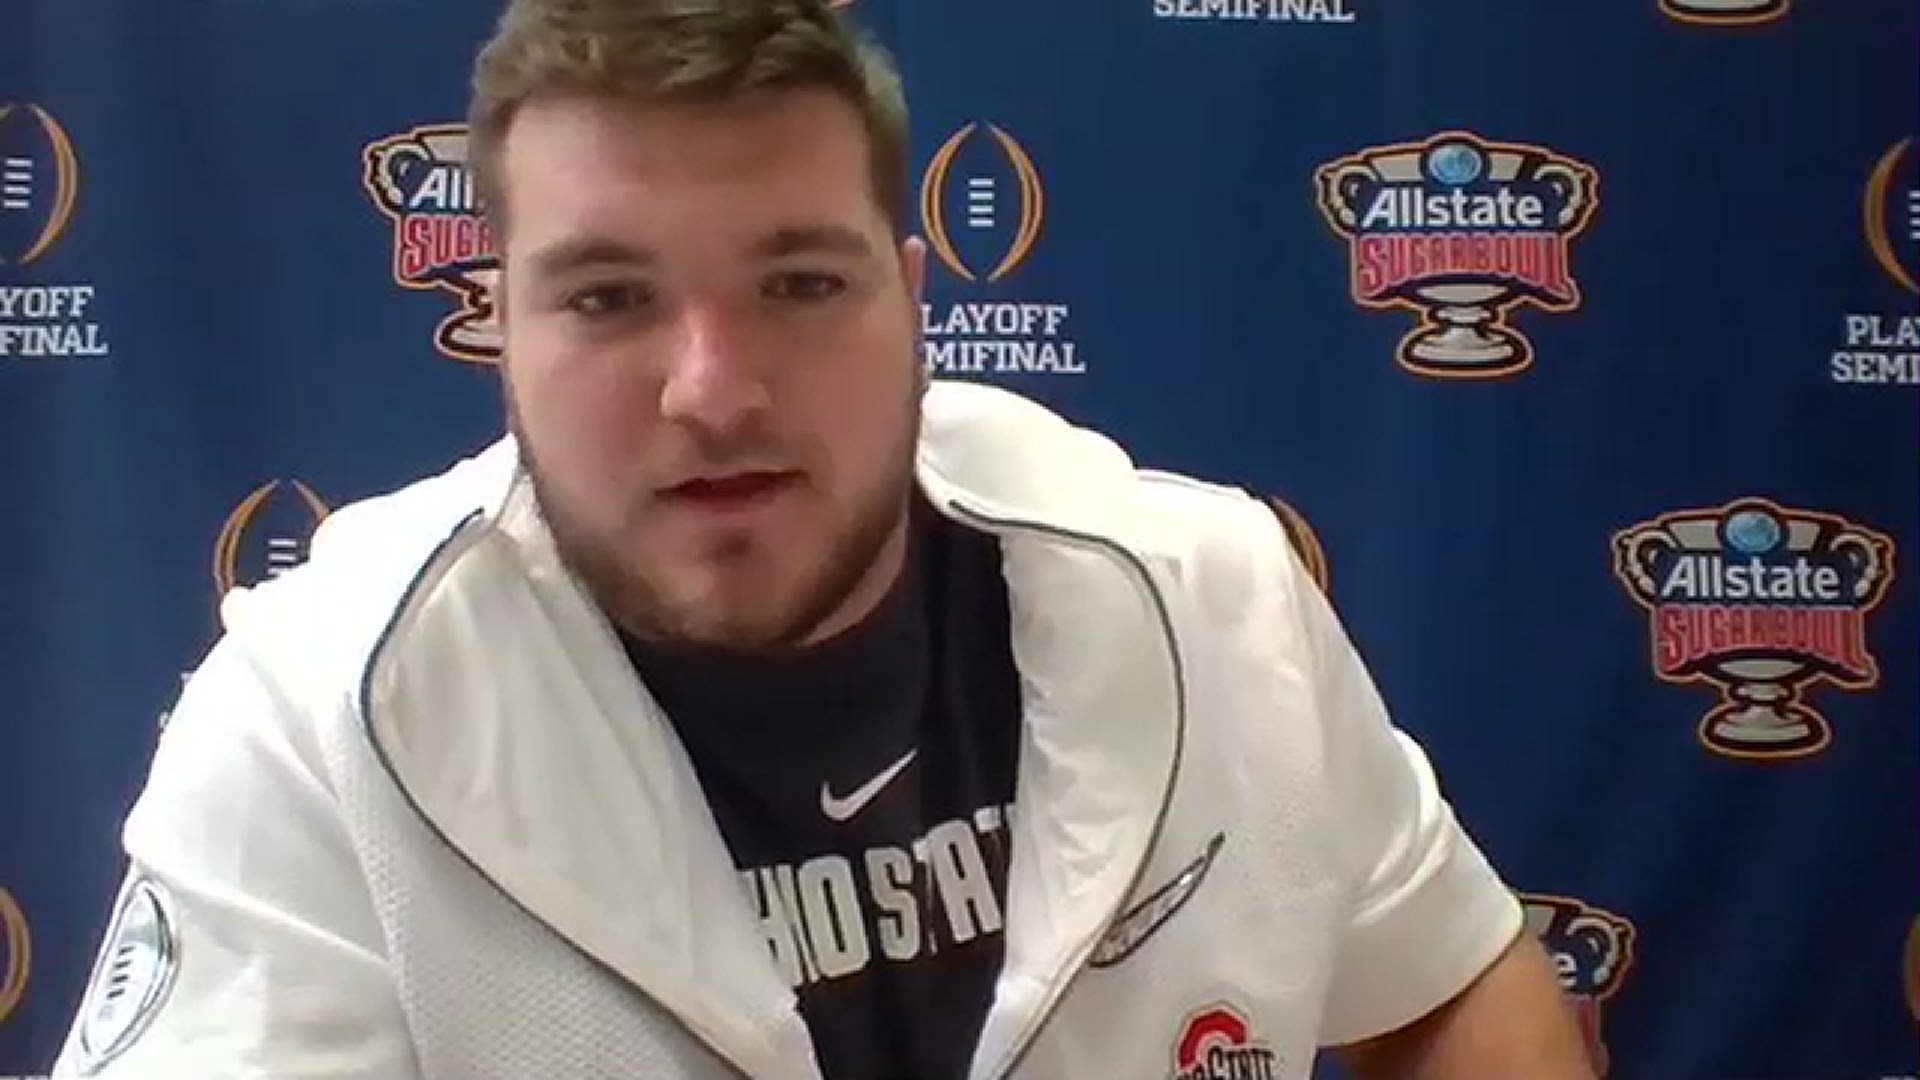 Center Josh Myers discusses Ohio State's upcoming matchup against Clemson in the Sugar Bowl.